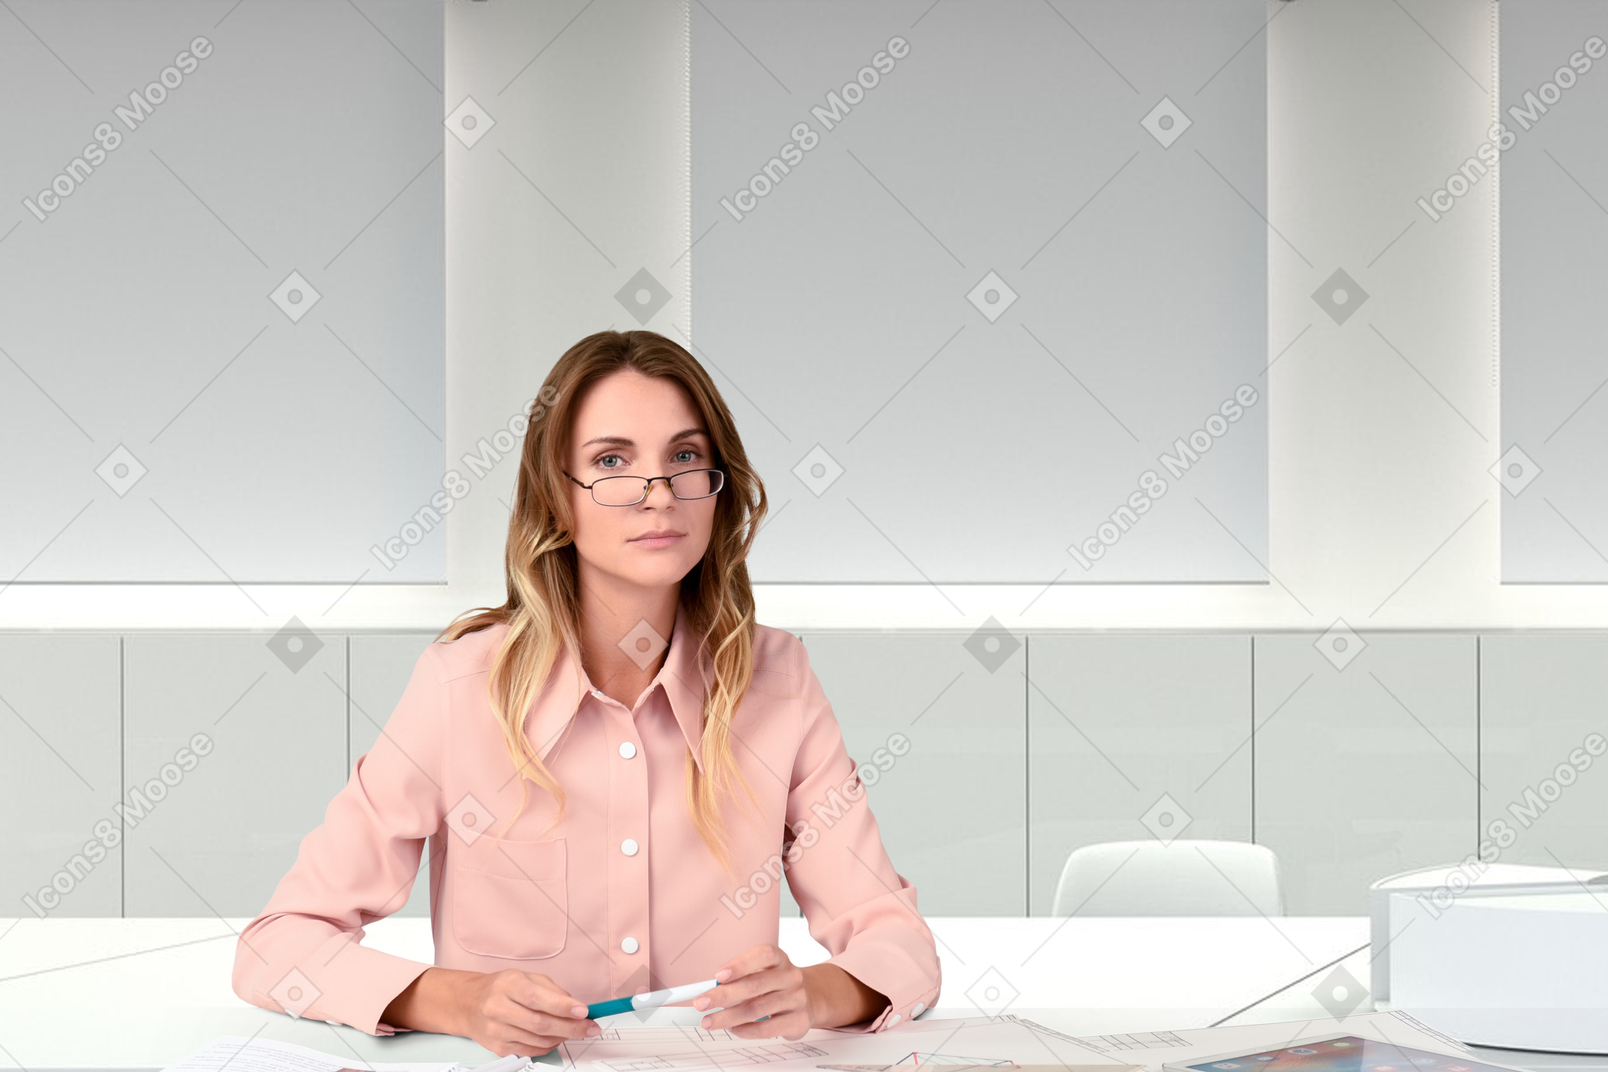 Woman sitting at a desk with a laptop